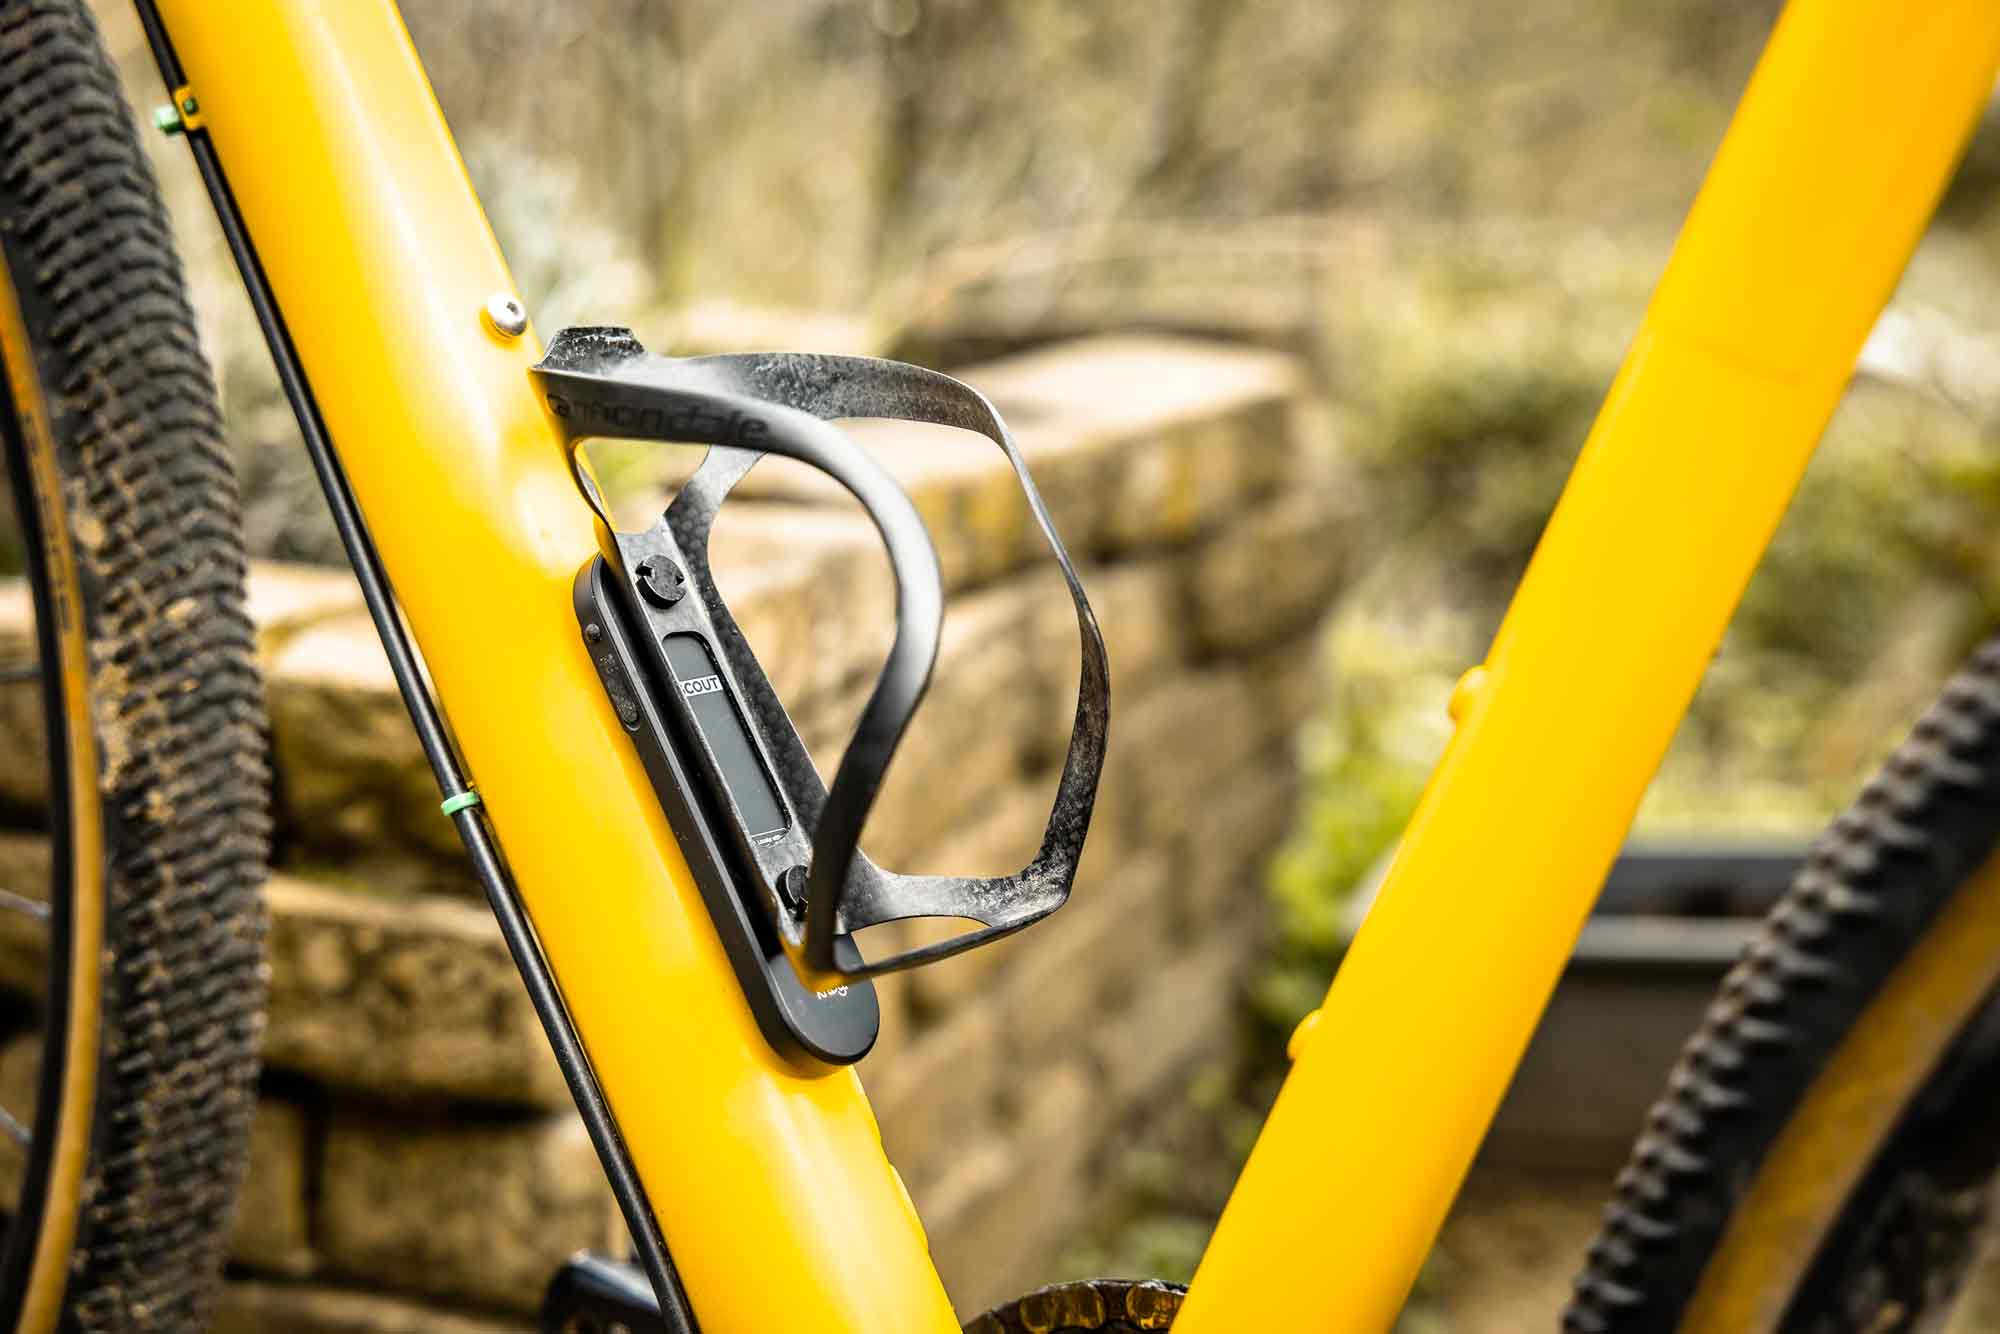 The scout can be mounted inconspicuously under the bottle cage.